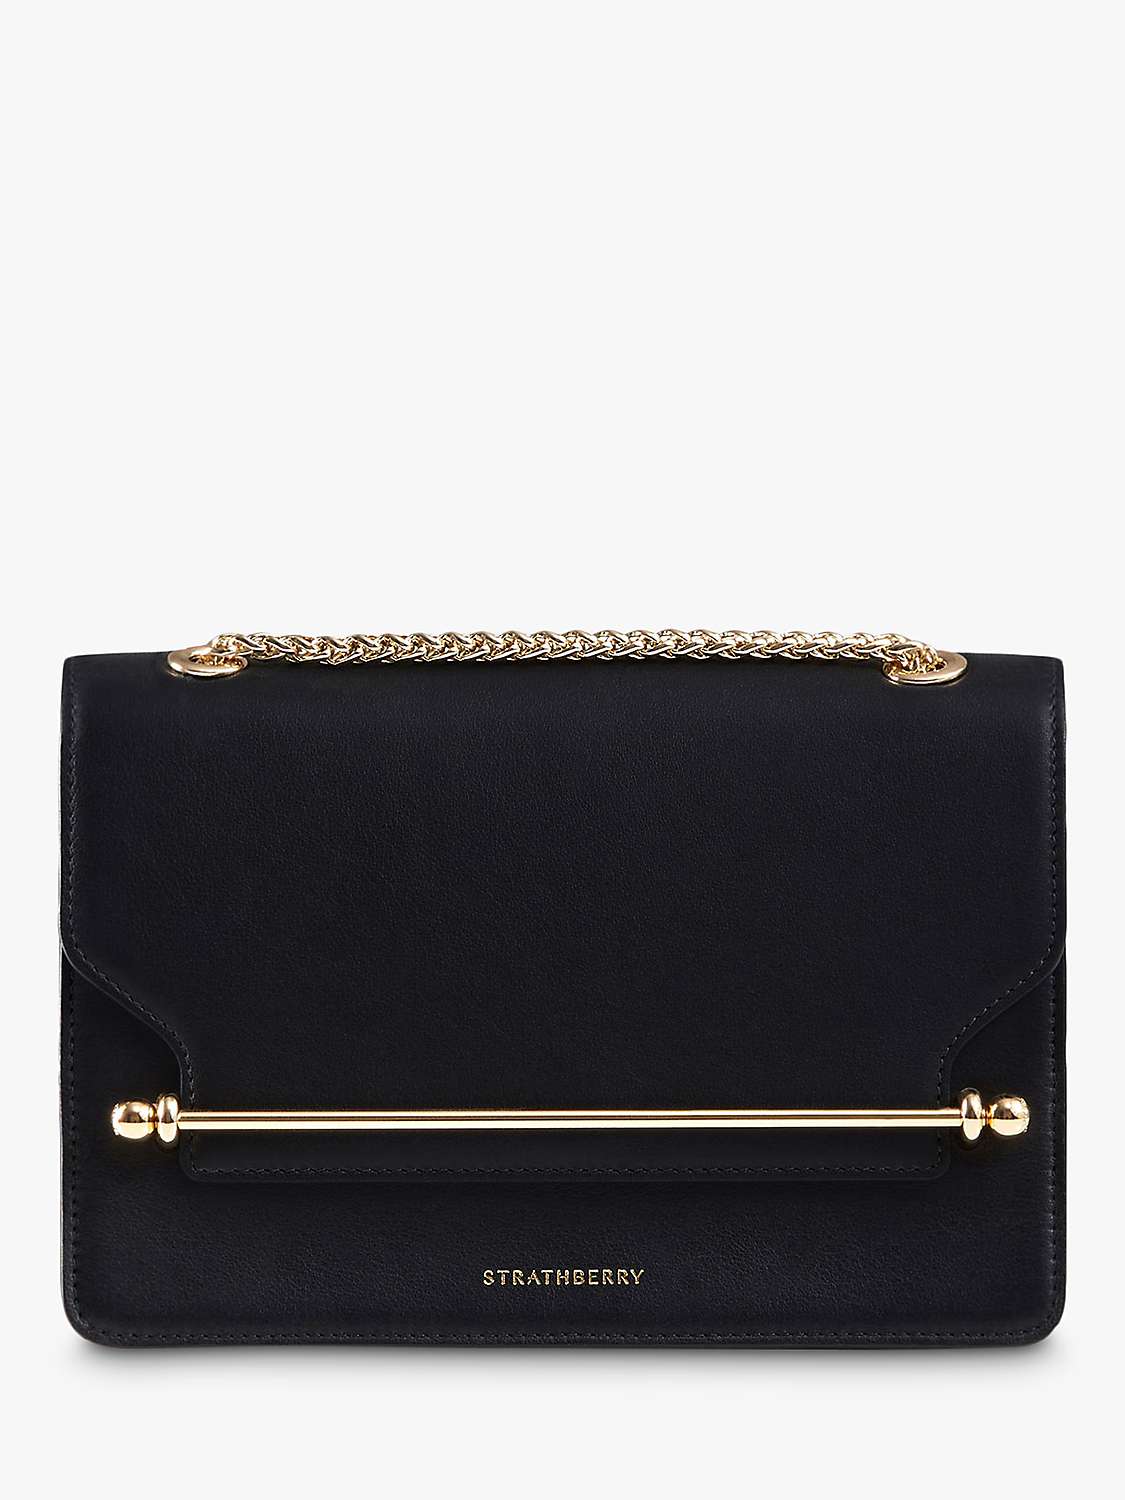 Buy Strathberry East/West Leather Cross Body Bag Online at johnlewis.com